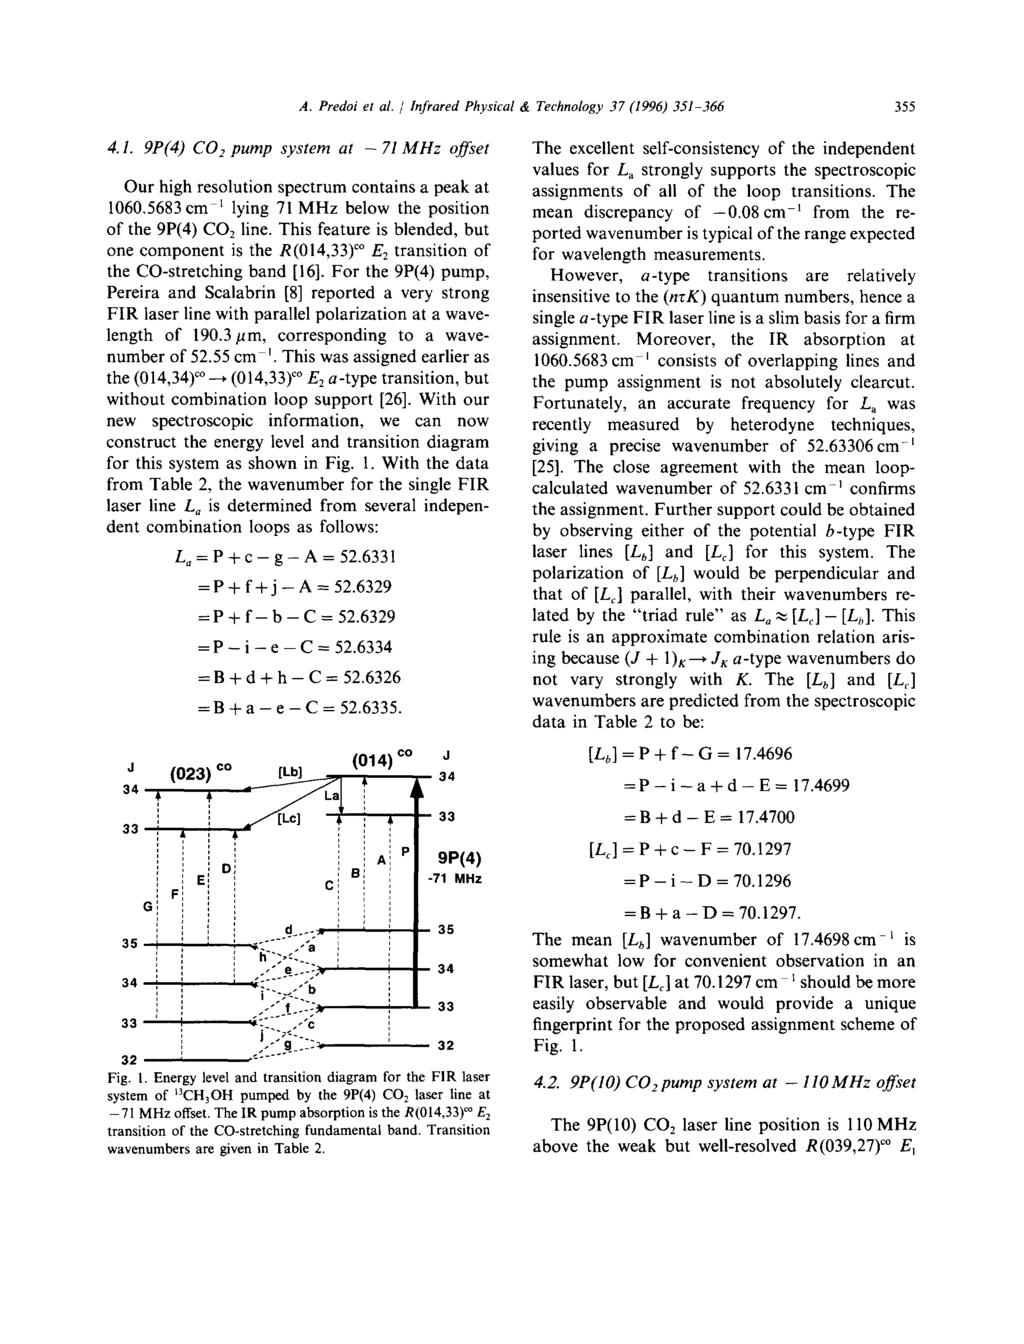 A. Predoi et al. / Infrared Physical & Technology 37 (1996) 351-366 355 4. I. 9P(4) CO 2 pump system at -71 MHz offset Our high resolution spectrum contains a peak at 1060,5683 cm 1 lying 71 MHz below the position of the 9P(4) CO2 line.